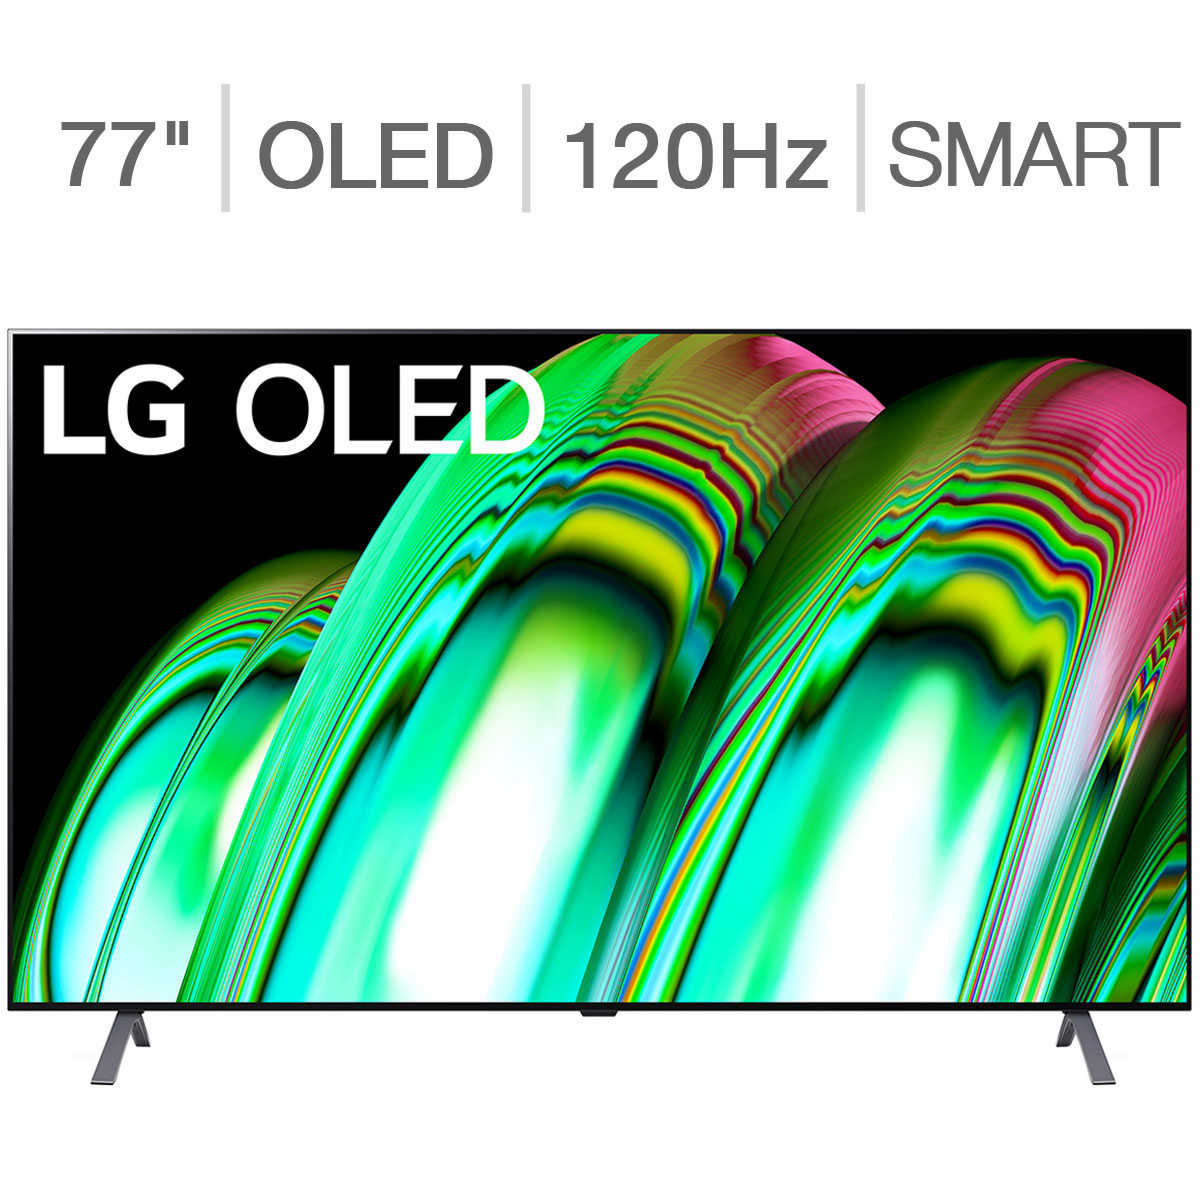 Samsung's 3D LED TVs include two pairs active glasses - CNET